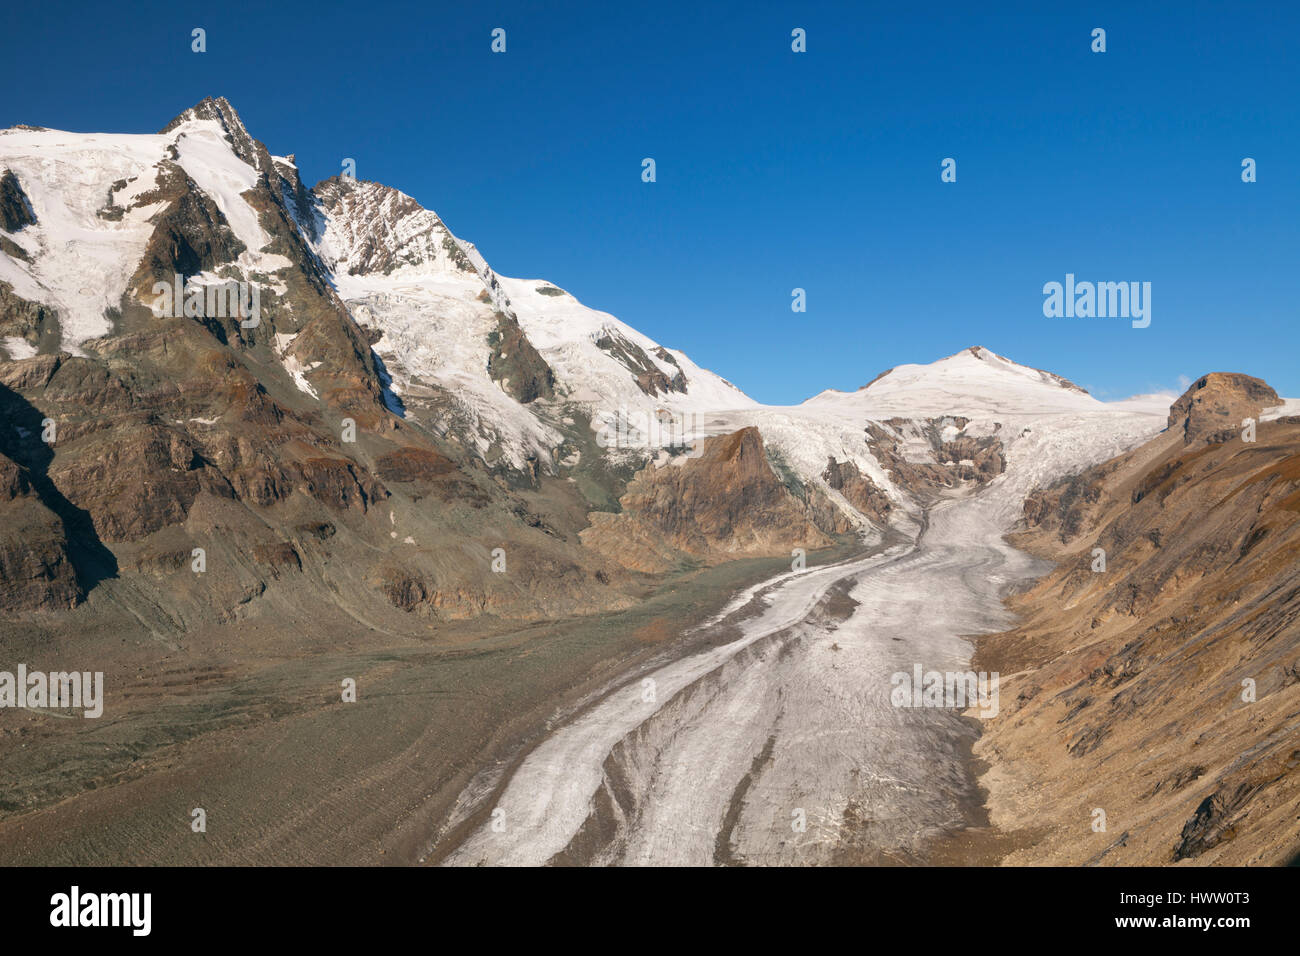 The Großglockner peak and Pasterze Glacier in the Hohe Tauern National Park in Austria on a clear day. Stock Photo